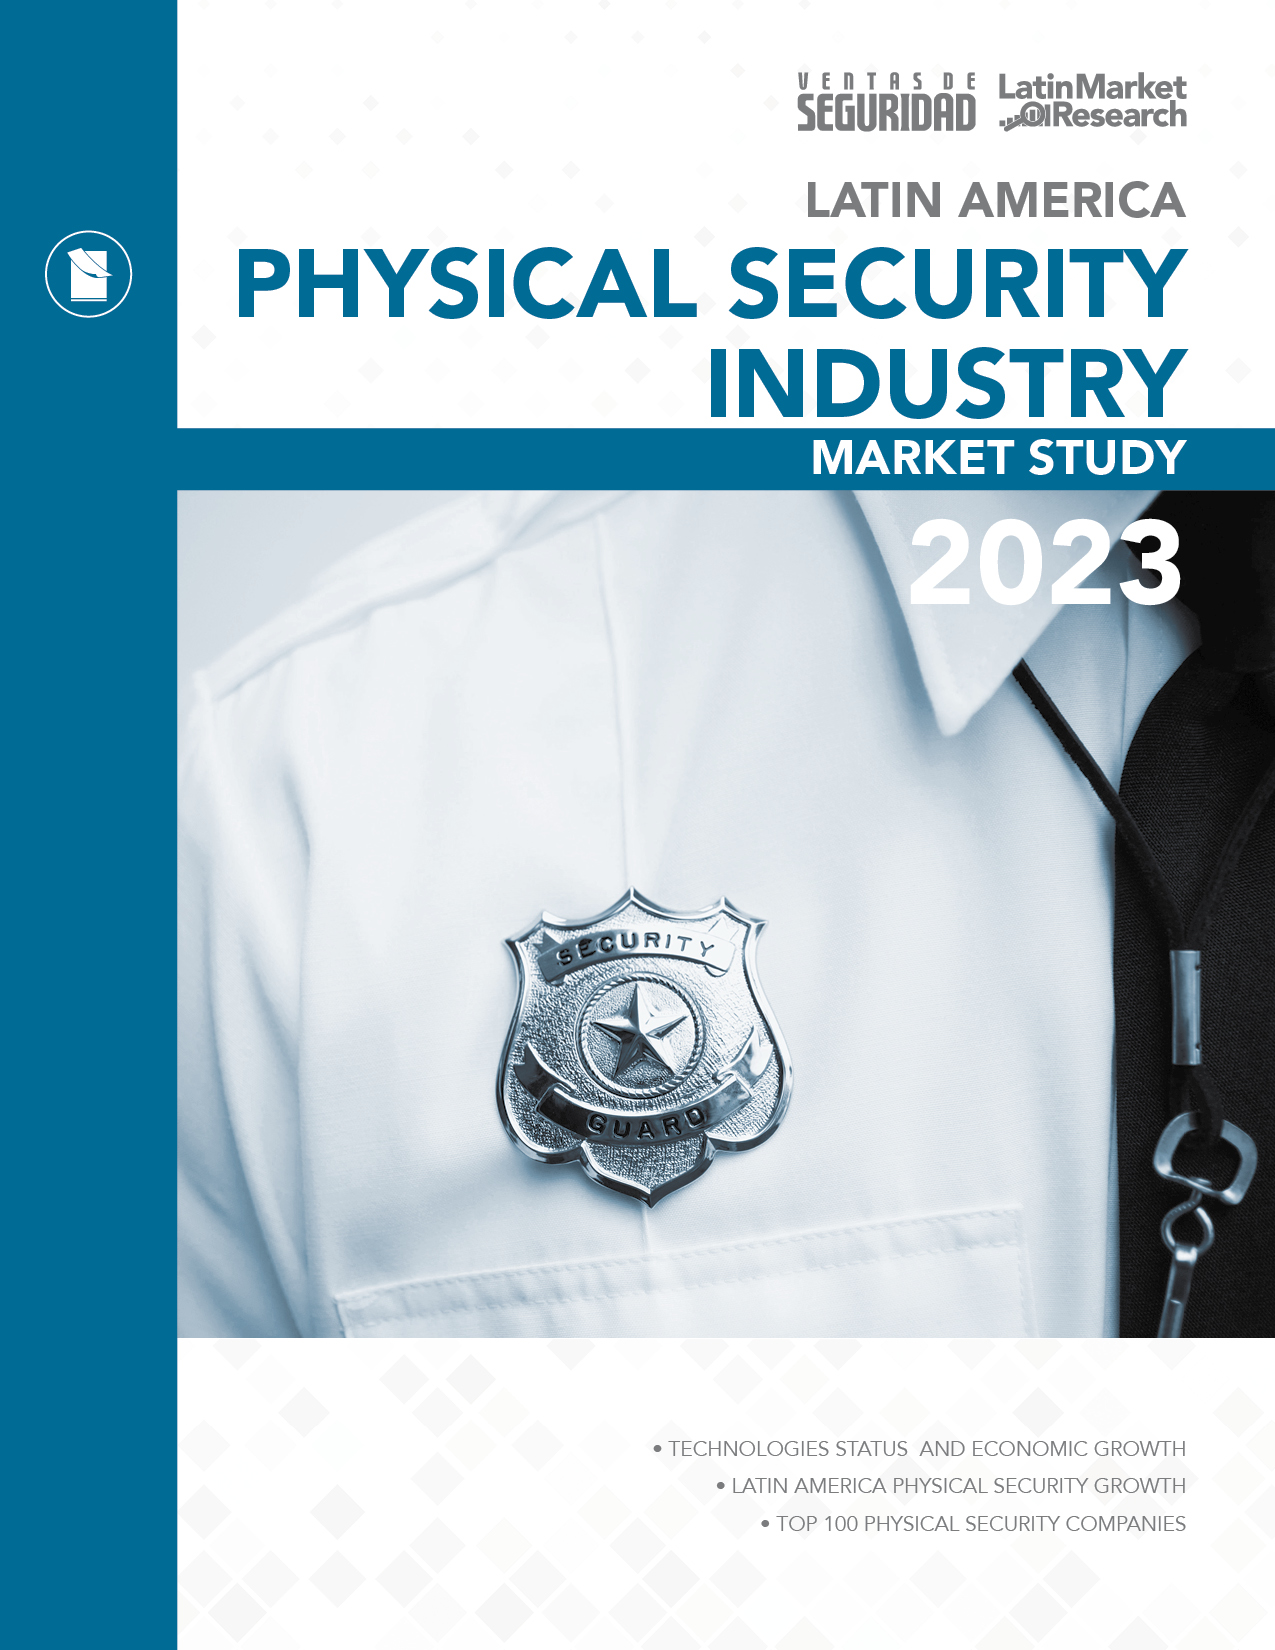 LATIN AMERICA PHYSICAL SECURITY INDUSTRY MARKET STUDY 2023